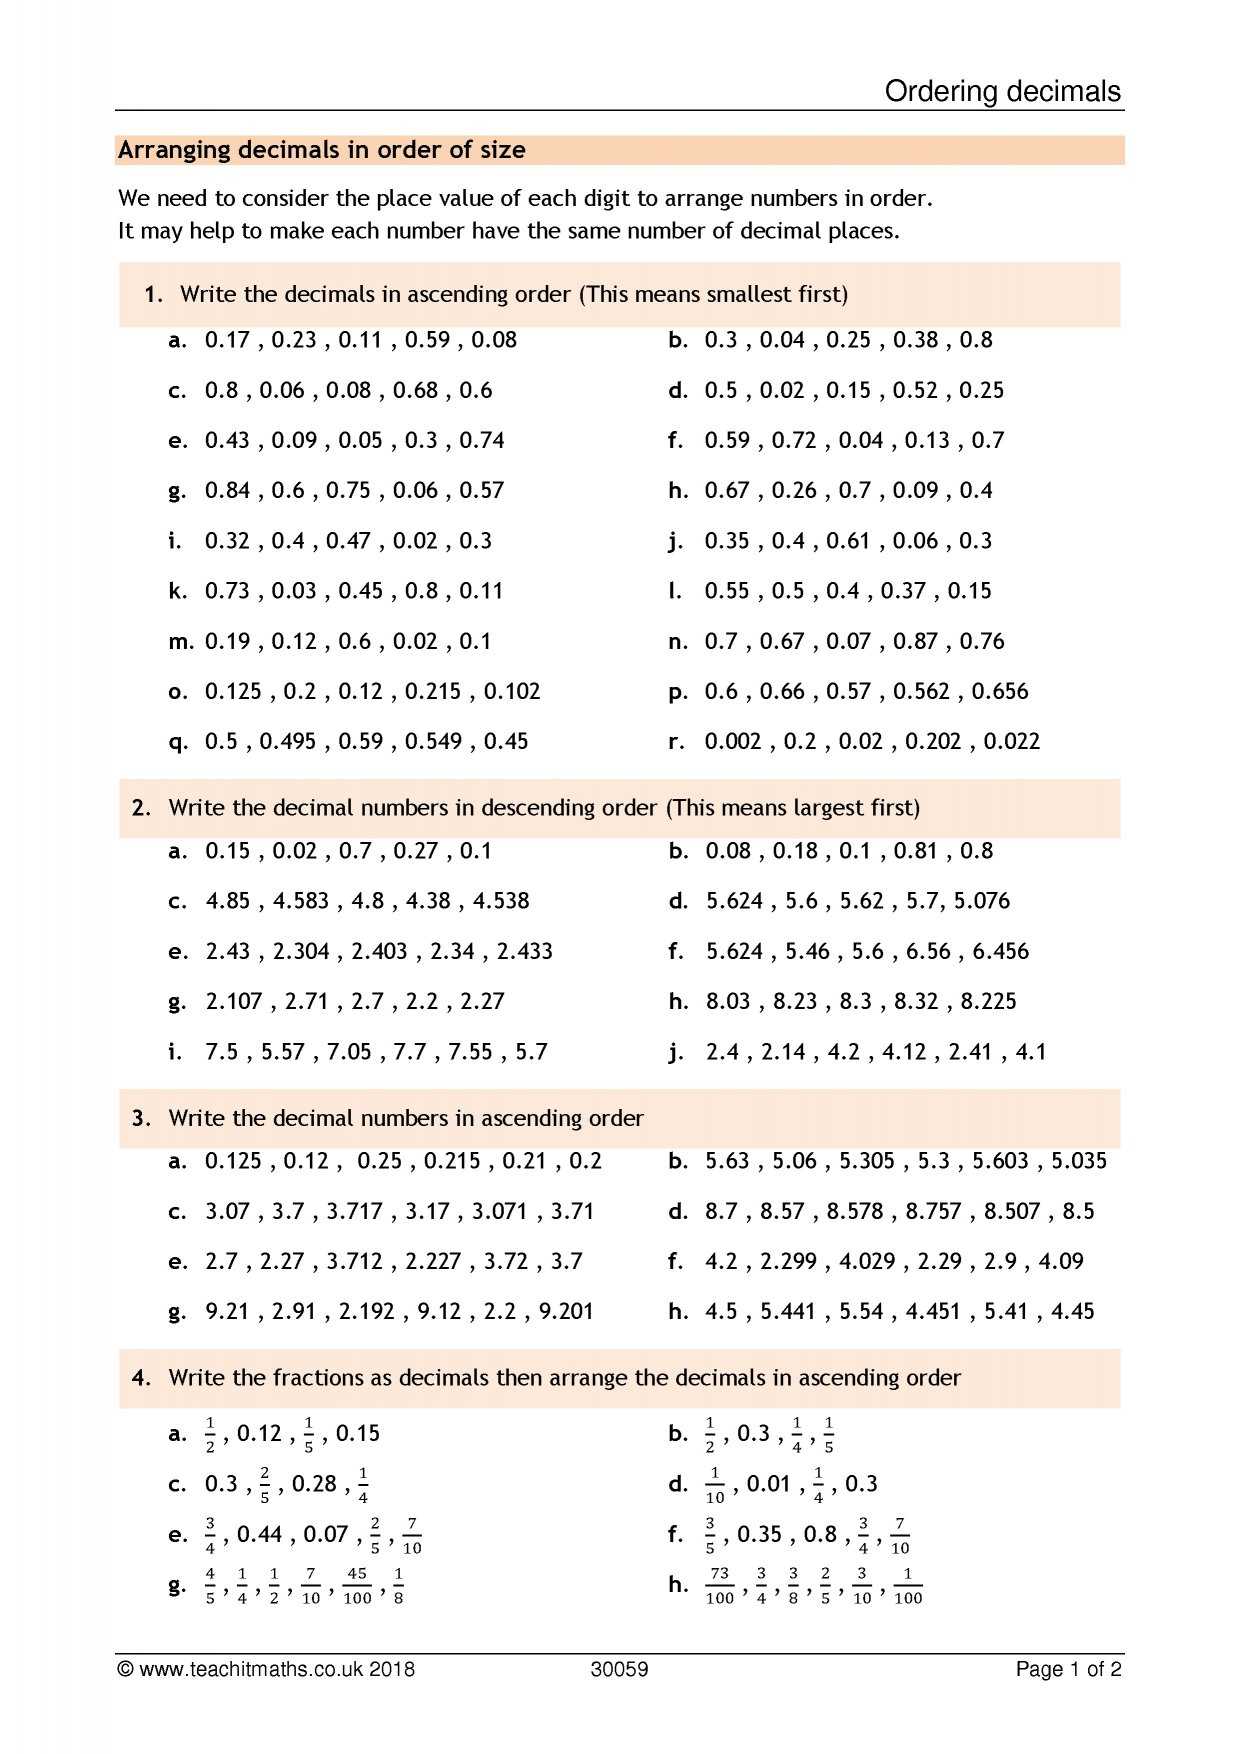 English to Metric Conversion Worksheet together with All Ks3 Resources Teachit Maths